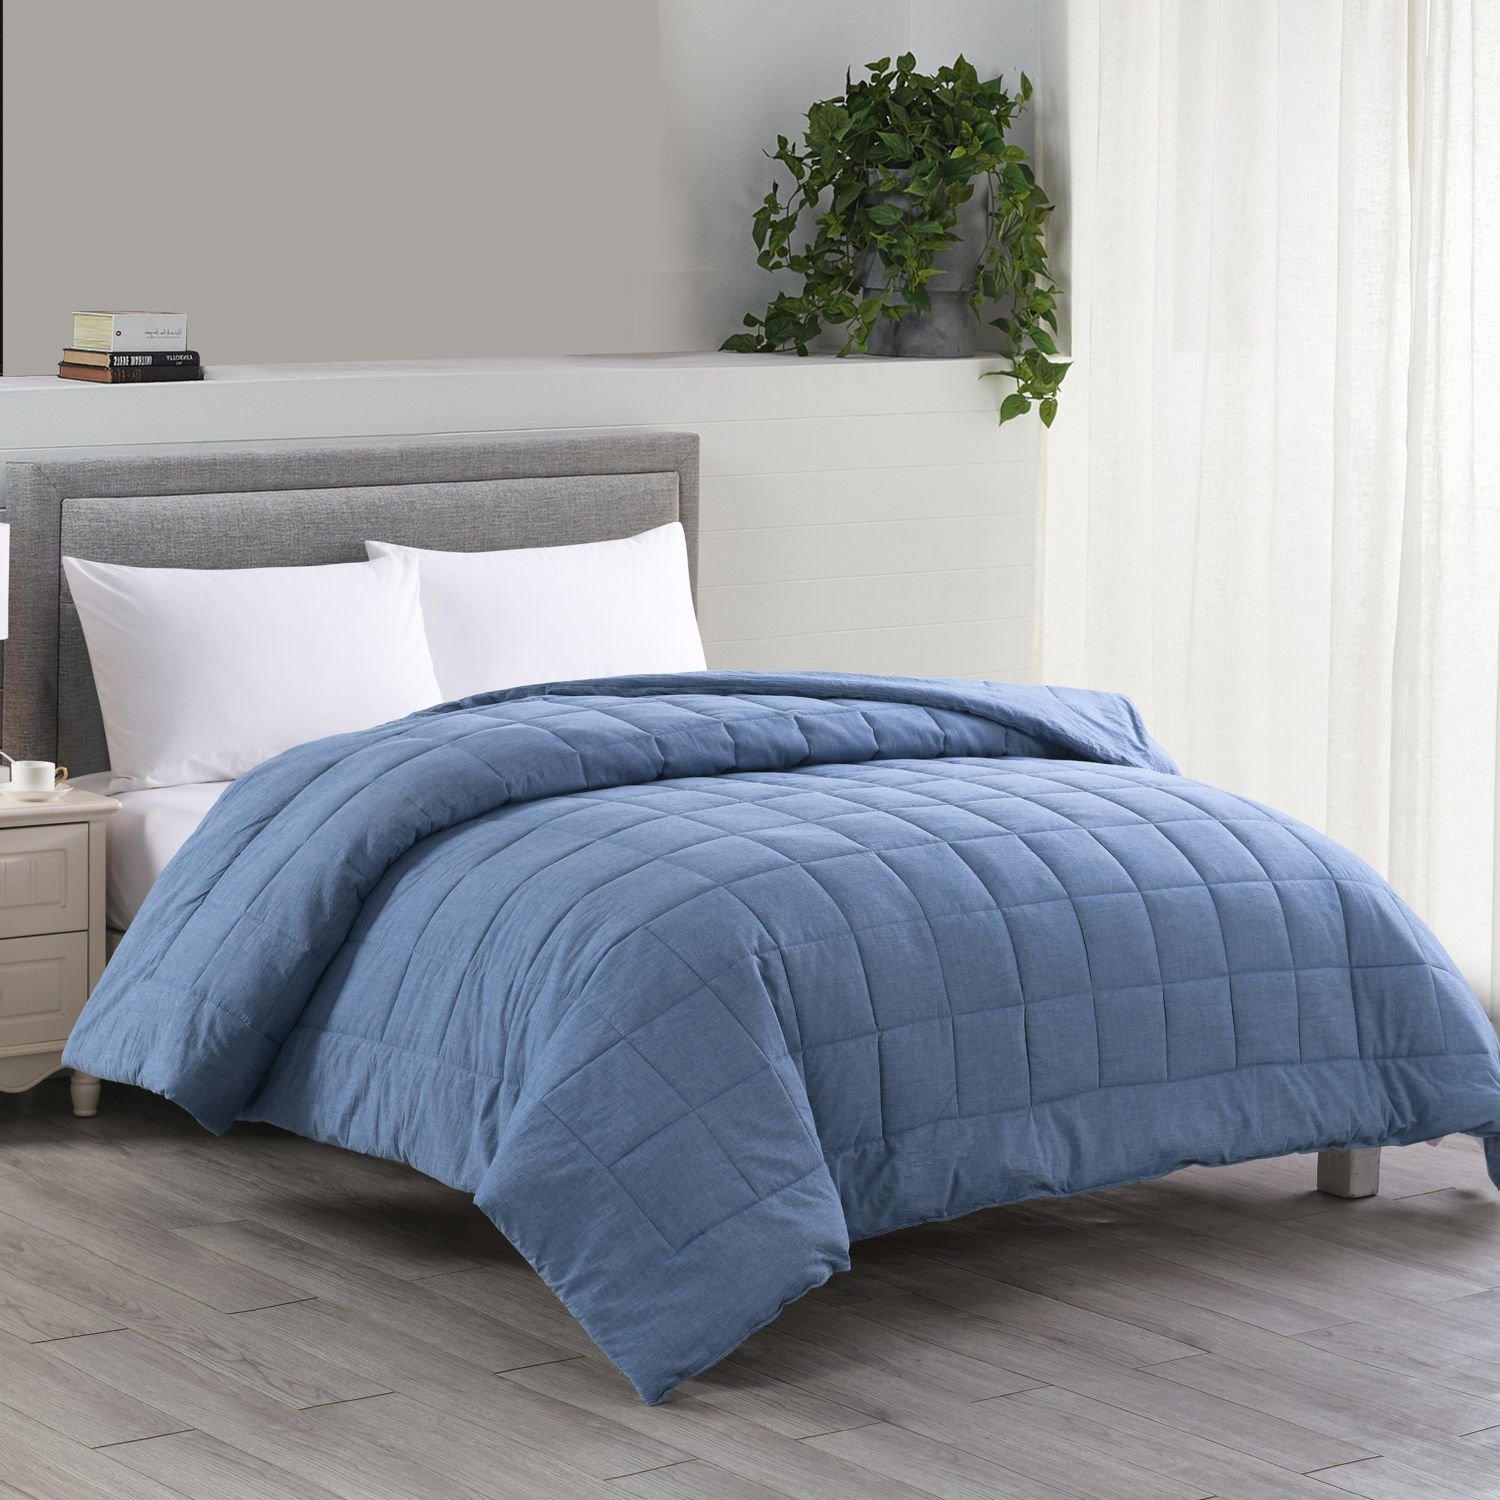 Lavish Home Quilted Cotton Silver Heat/Flame Resistant Oversized